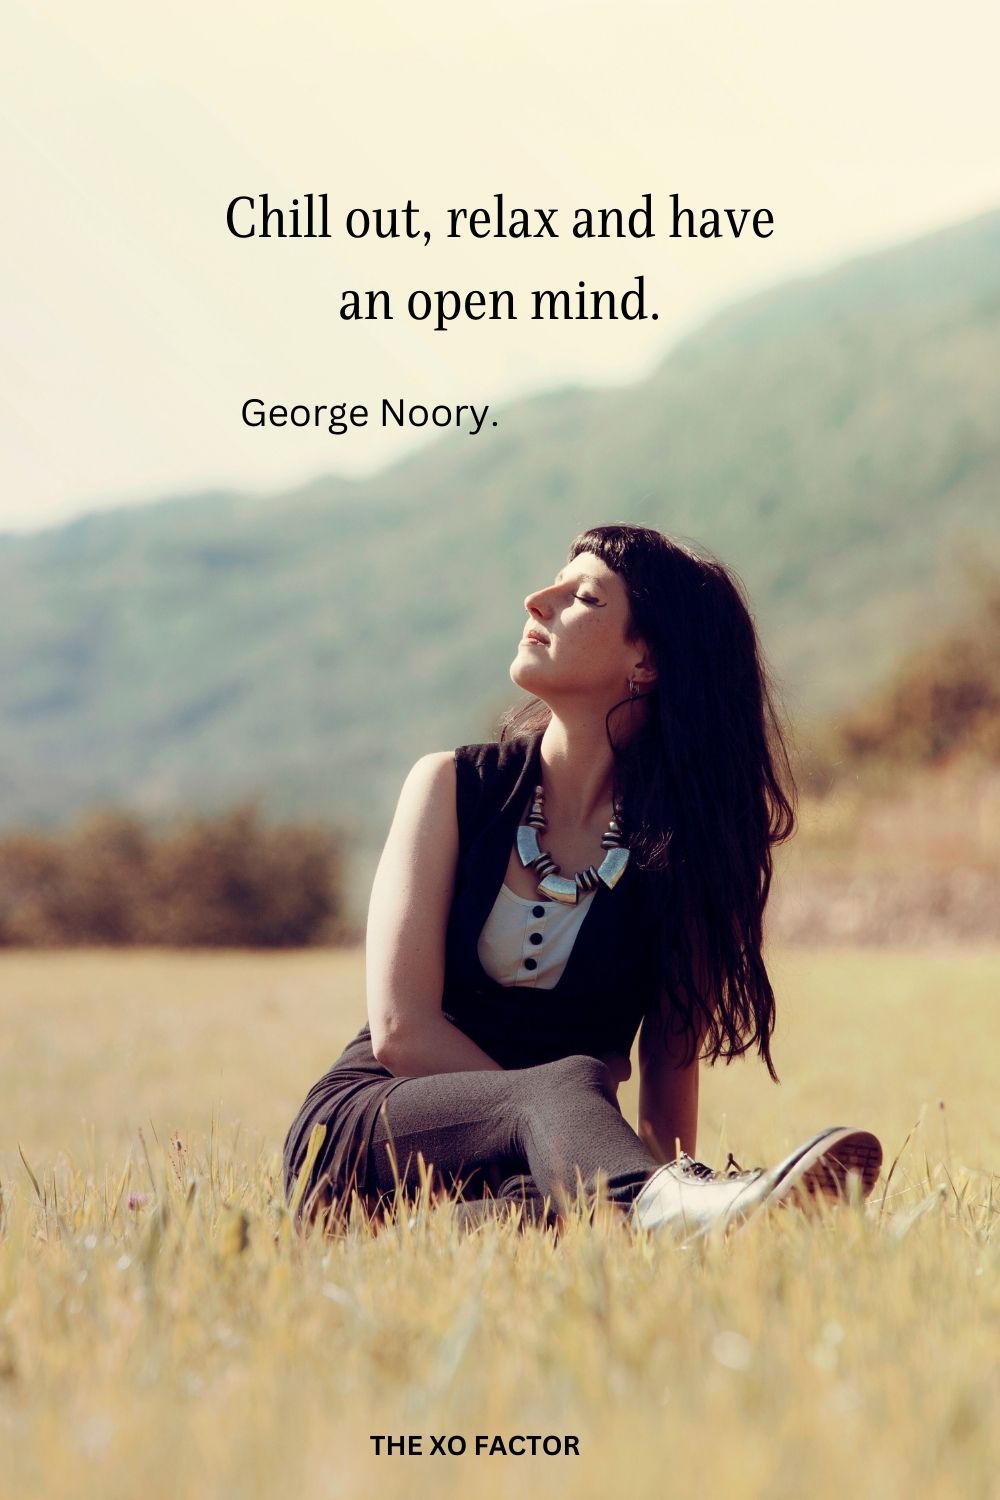 Chill out, relax and have an open mind.
George Noory.